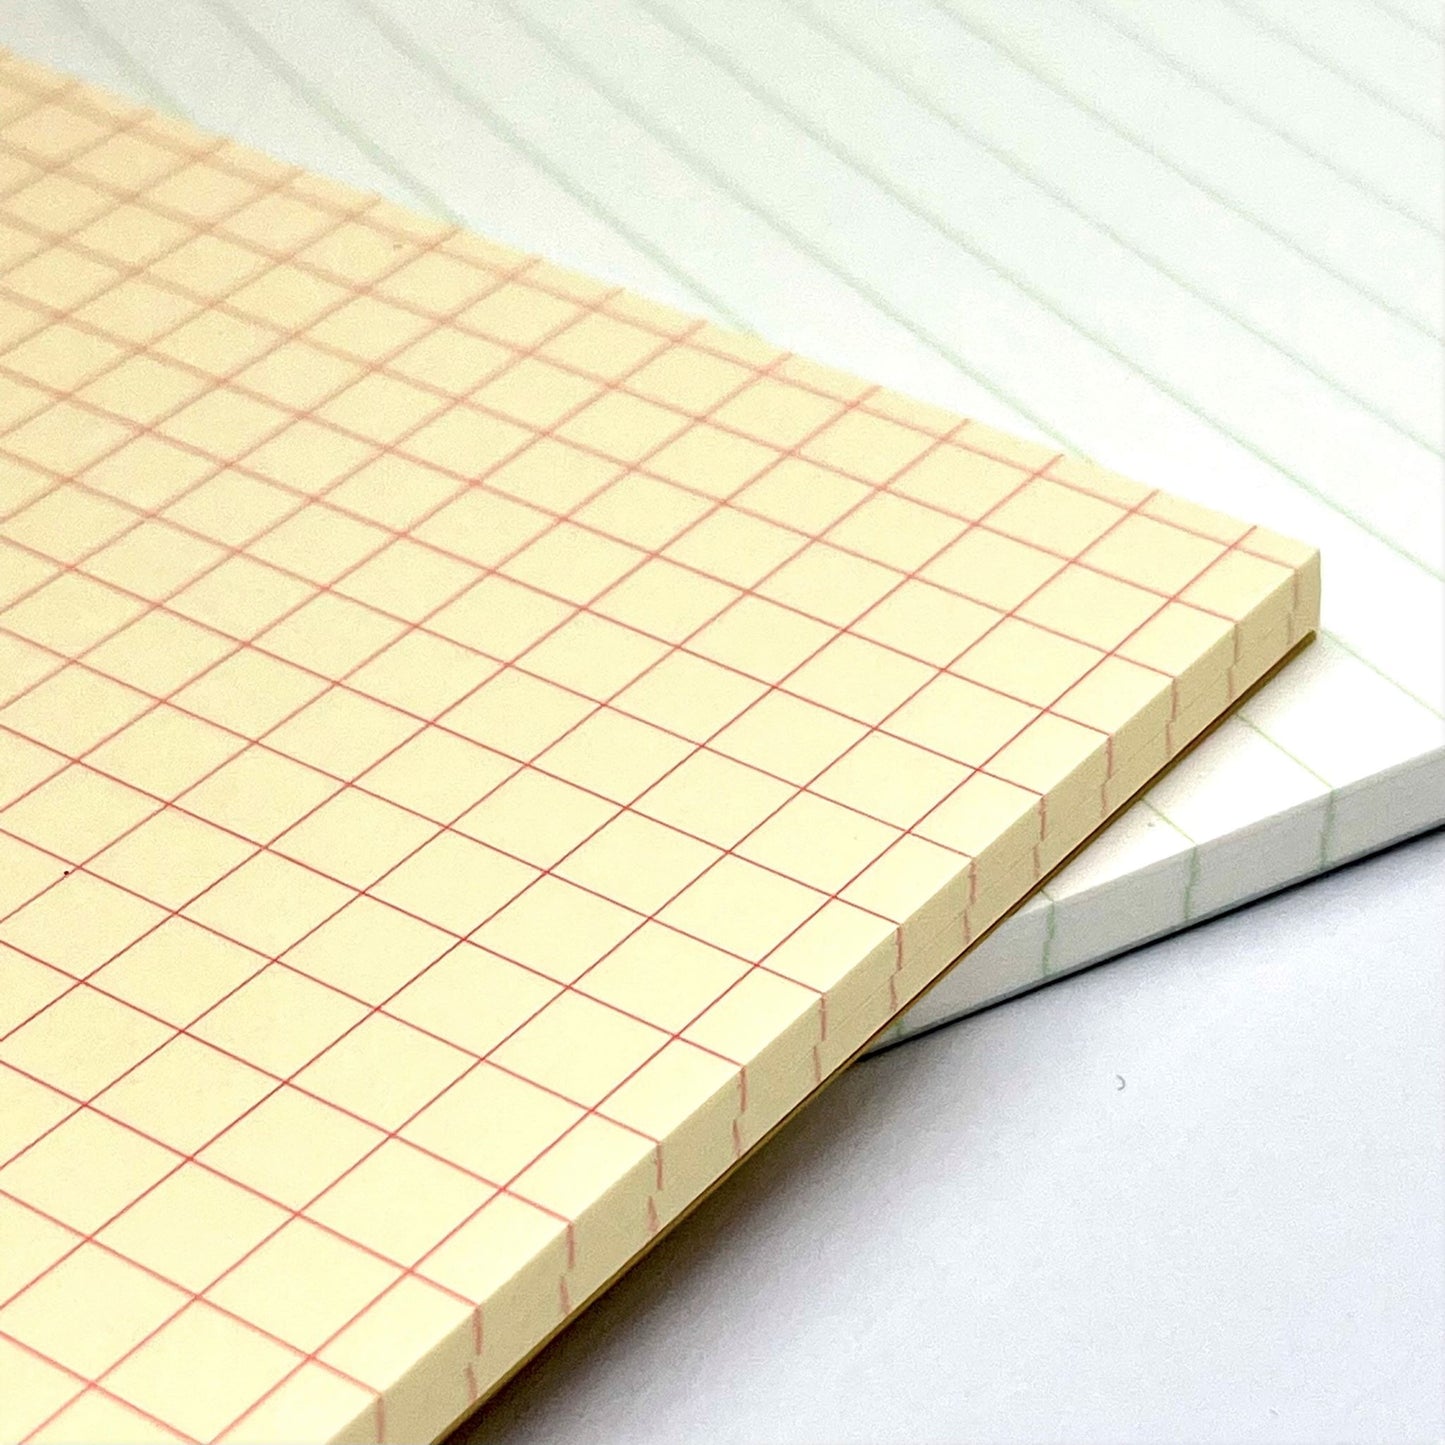 A5 softcover notebook with a soft yellow cover with blue border and branding, close up of the inner cream grid pages